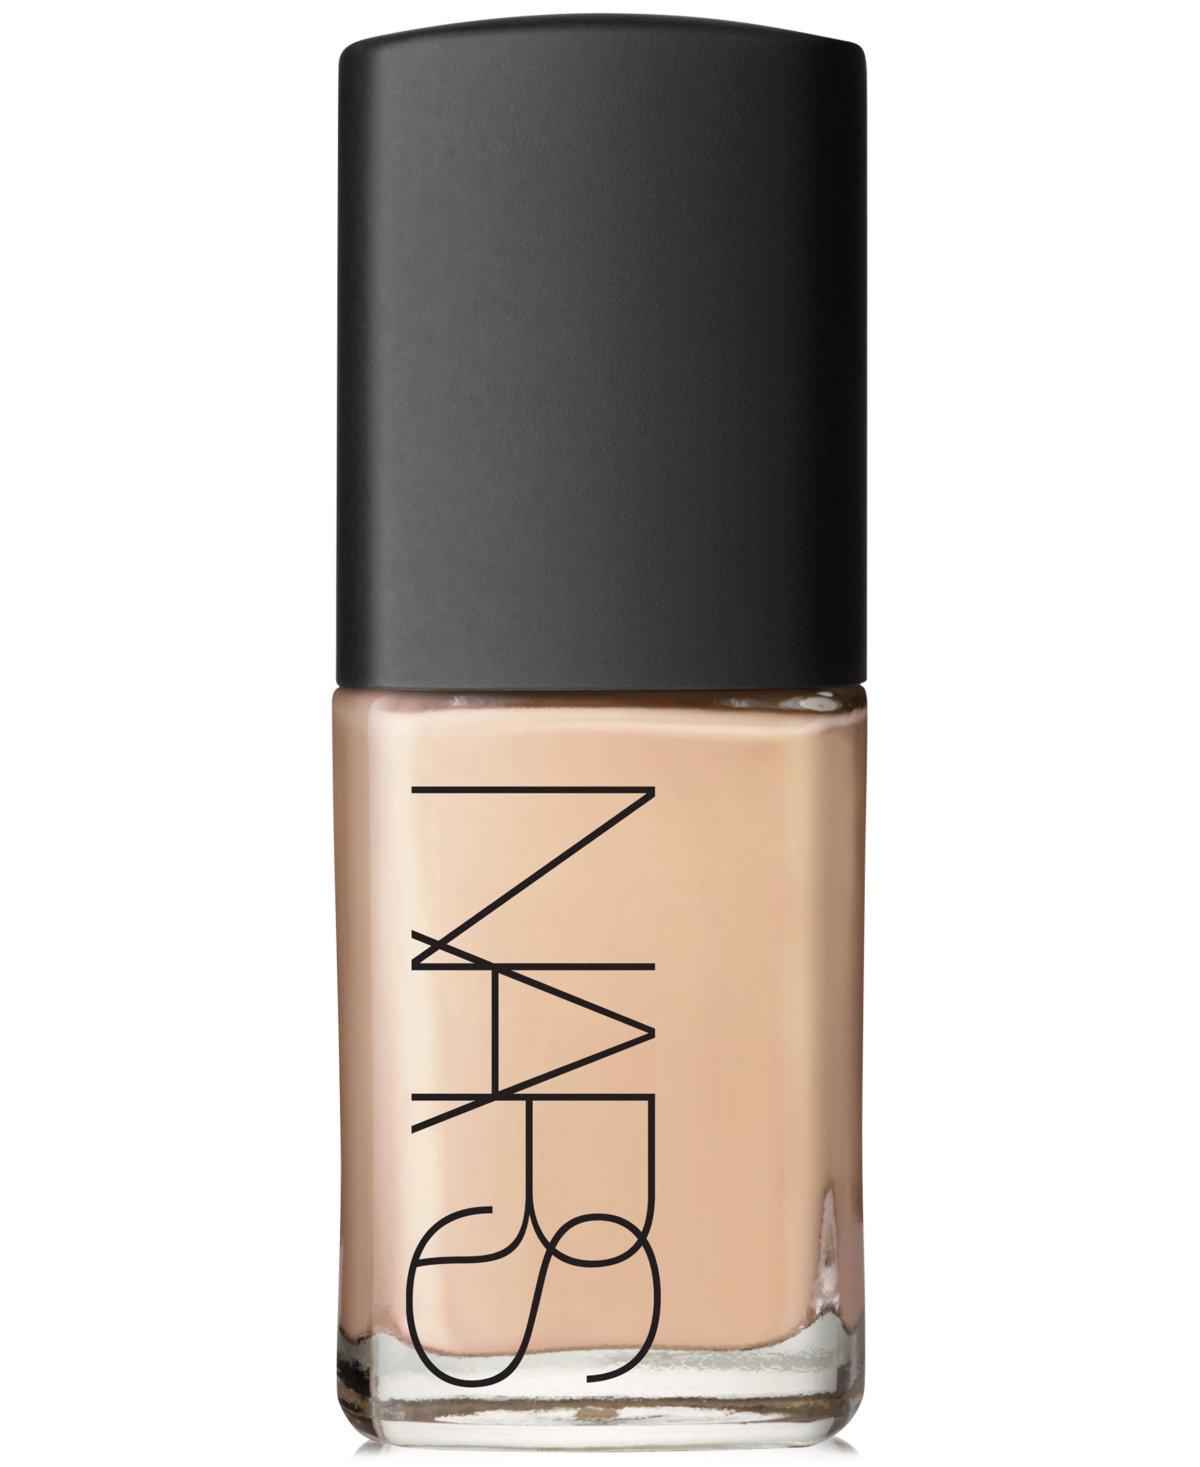 Nars Sheer Glow Foundation, 1 Oz. In Deauville (l - Light With Neutral Undert